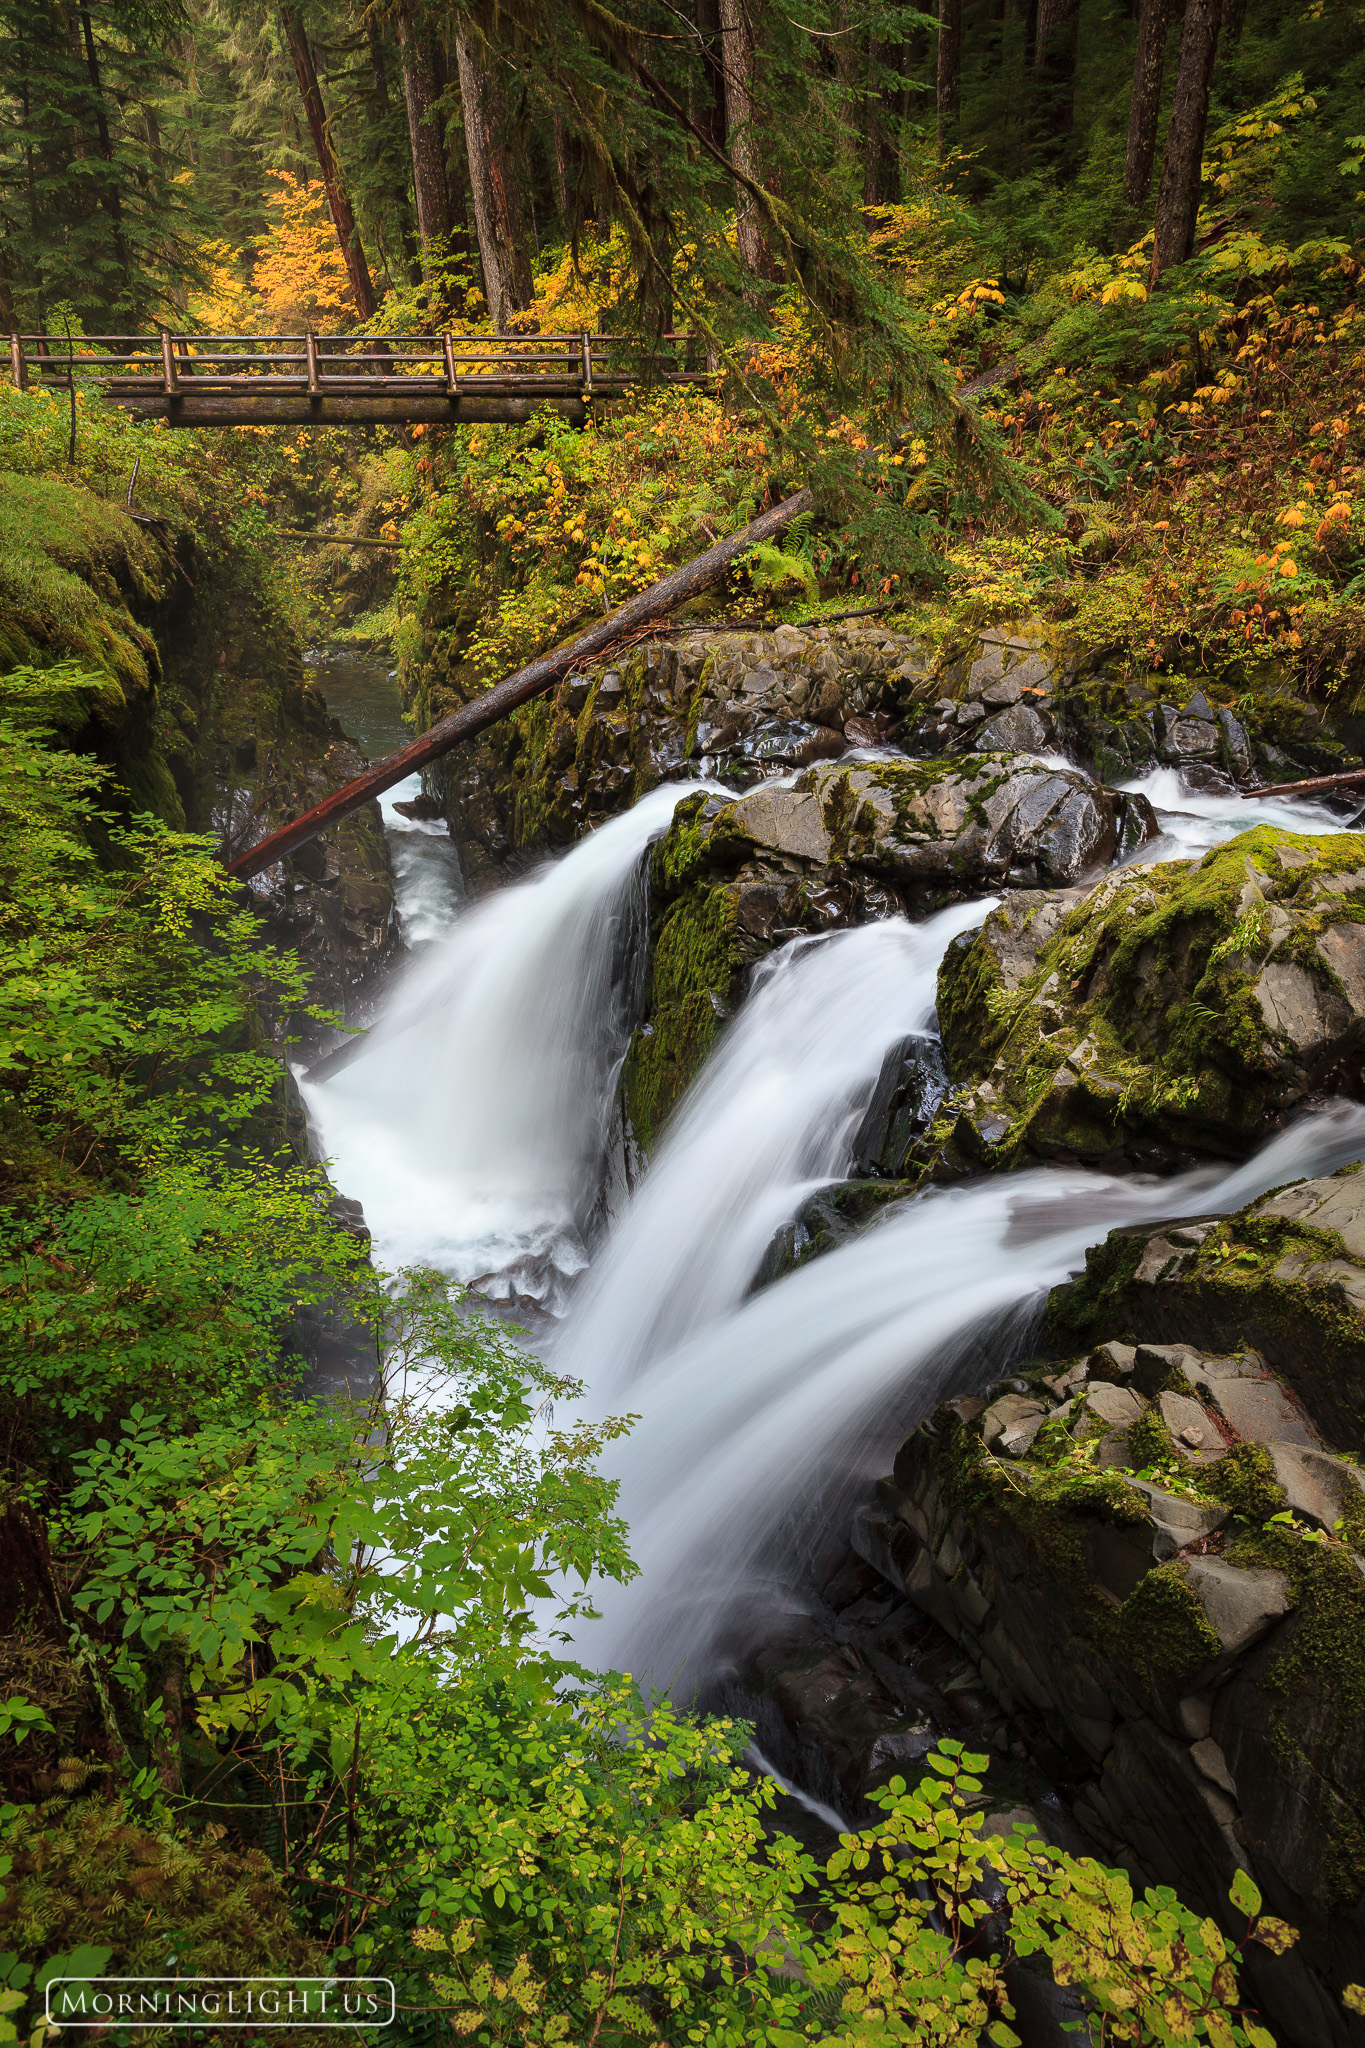 The classic view of the waterfalls at Sol Duc in Olympic National Park